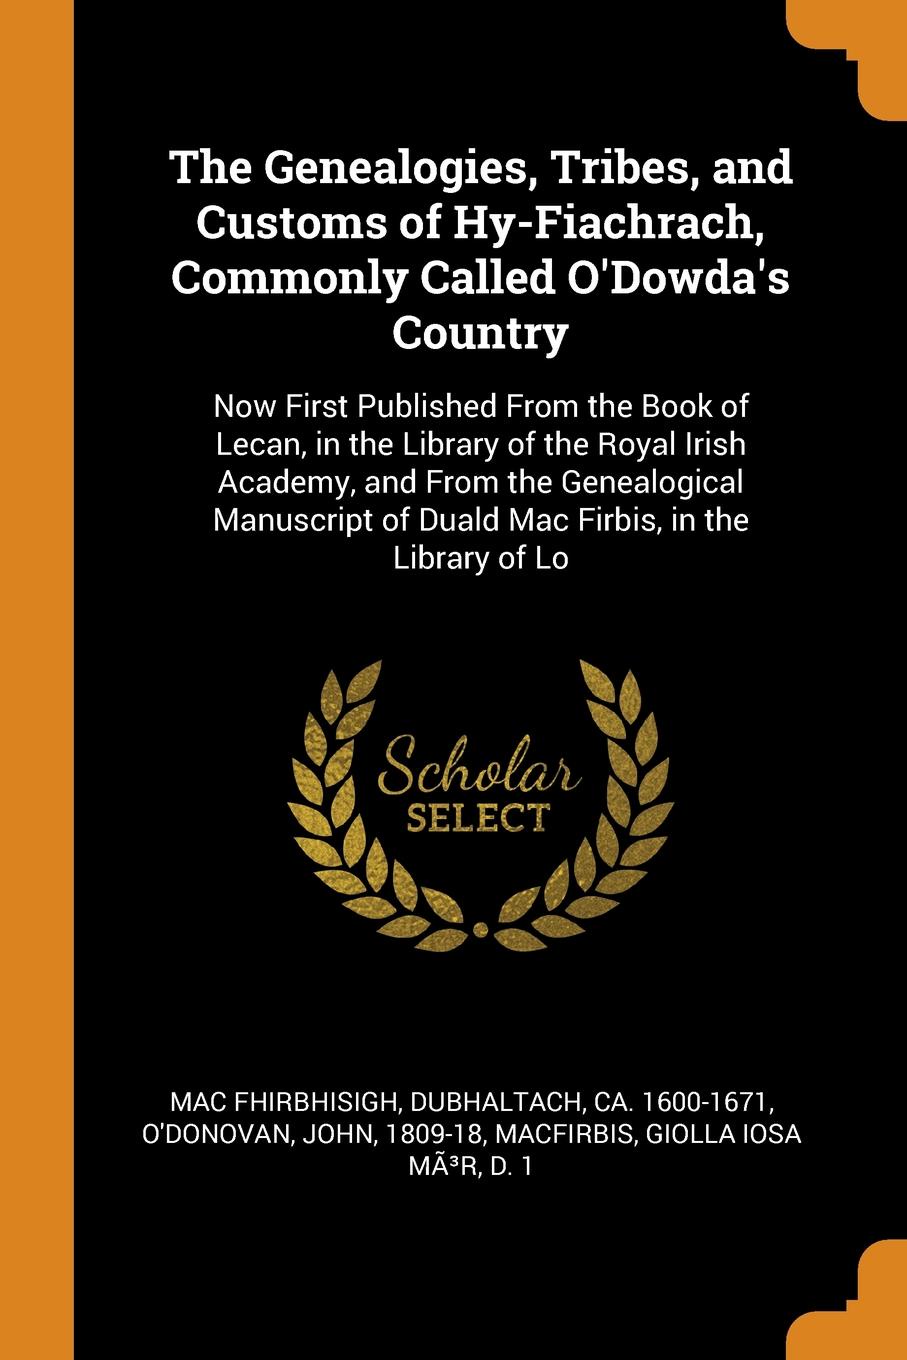 The Genealogies, Tribes, and Customs of Hy-Fiachrach, Commonly Called O`Dowda`s Country. Now First Published From the Book of Lecan, in the Library of the Royal Irish Academy, and From the Genealogical Manuscript of Duald Mac Firbis, in the Librar...